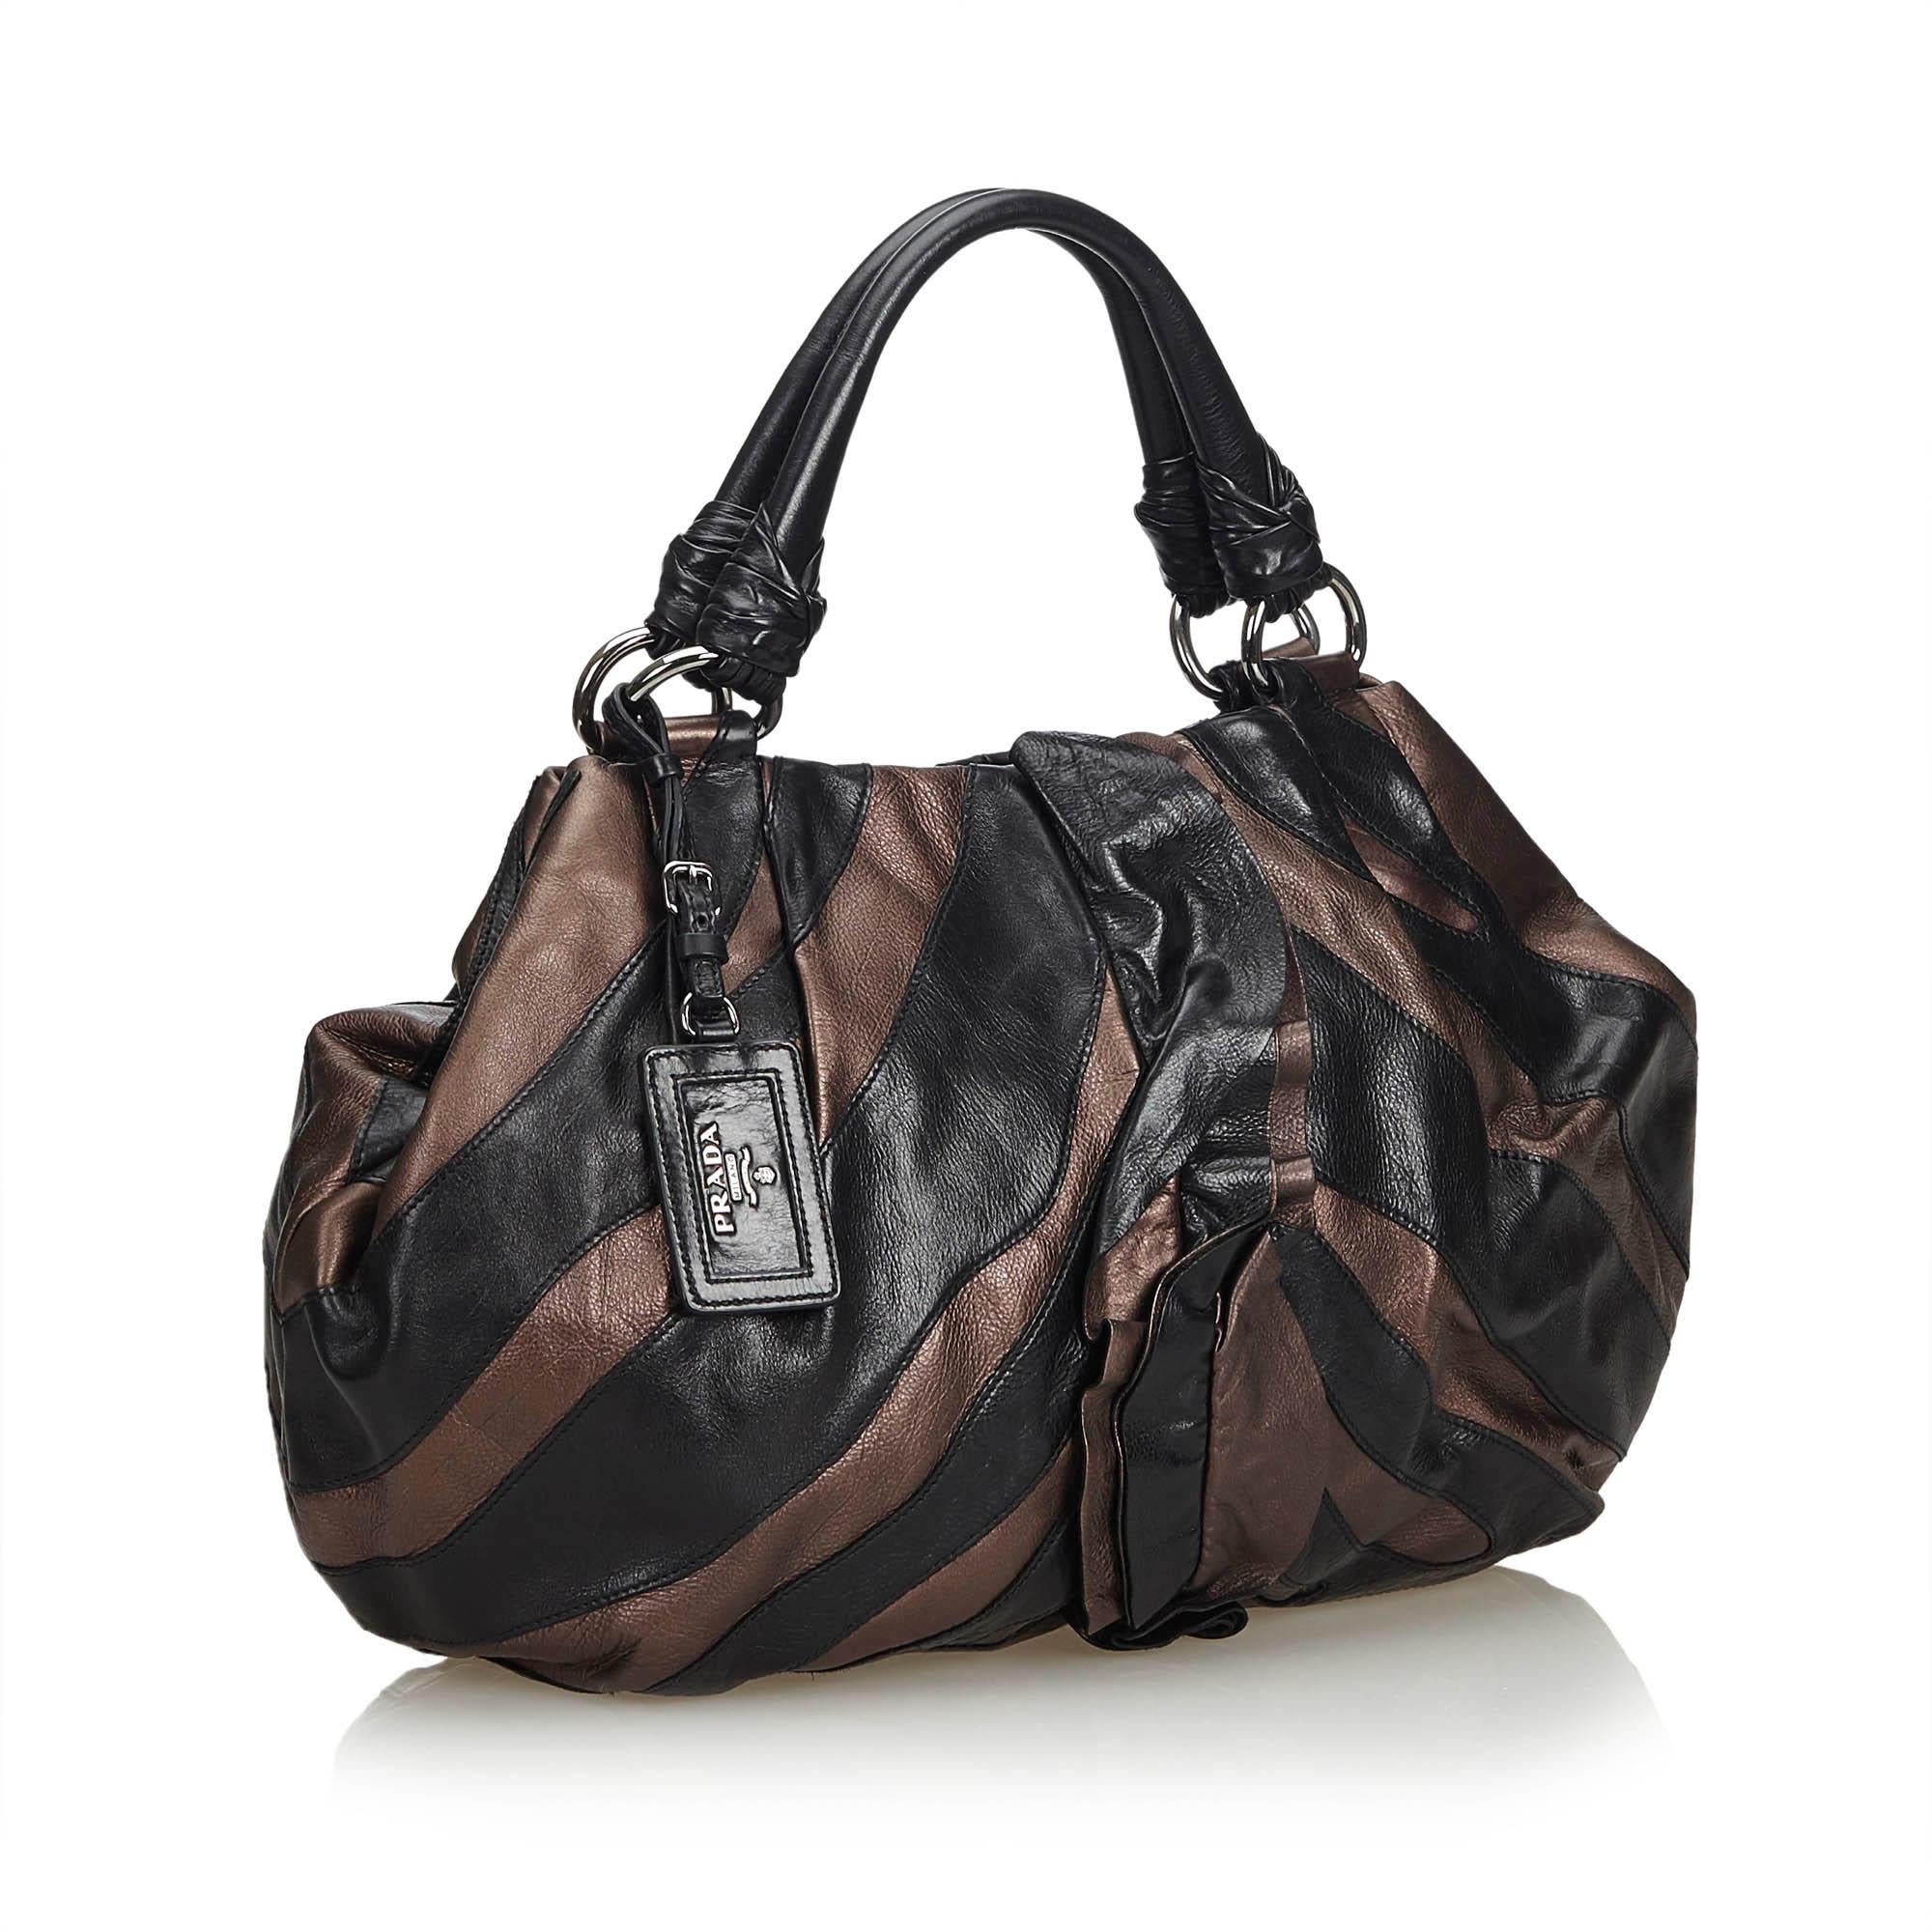 This Mordore tote bag features a ruffled leather body, rolled leather handles, an open top with a magnetic closure, and interior zip and slip pockets. It carries as AB condition rating.

Inclusions: 
Authenticity Card
Dimensions:
Length: 32.00